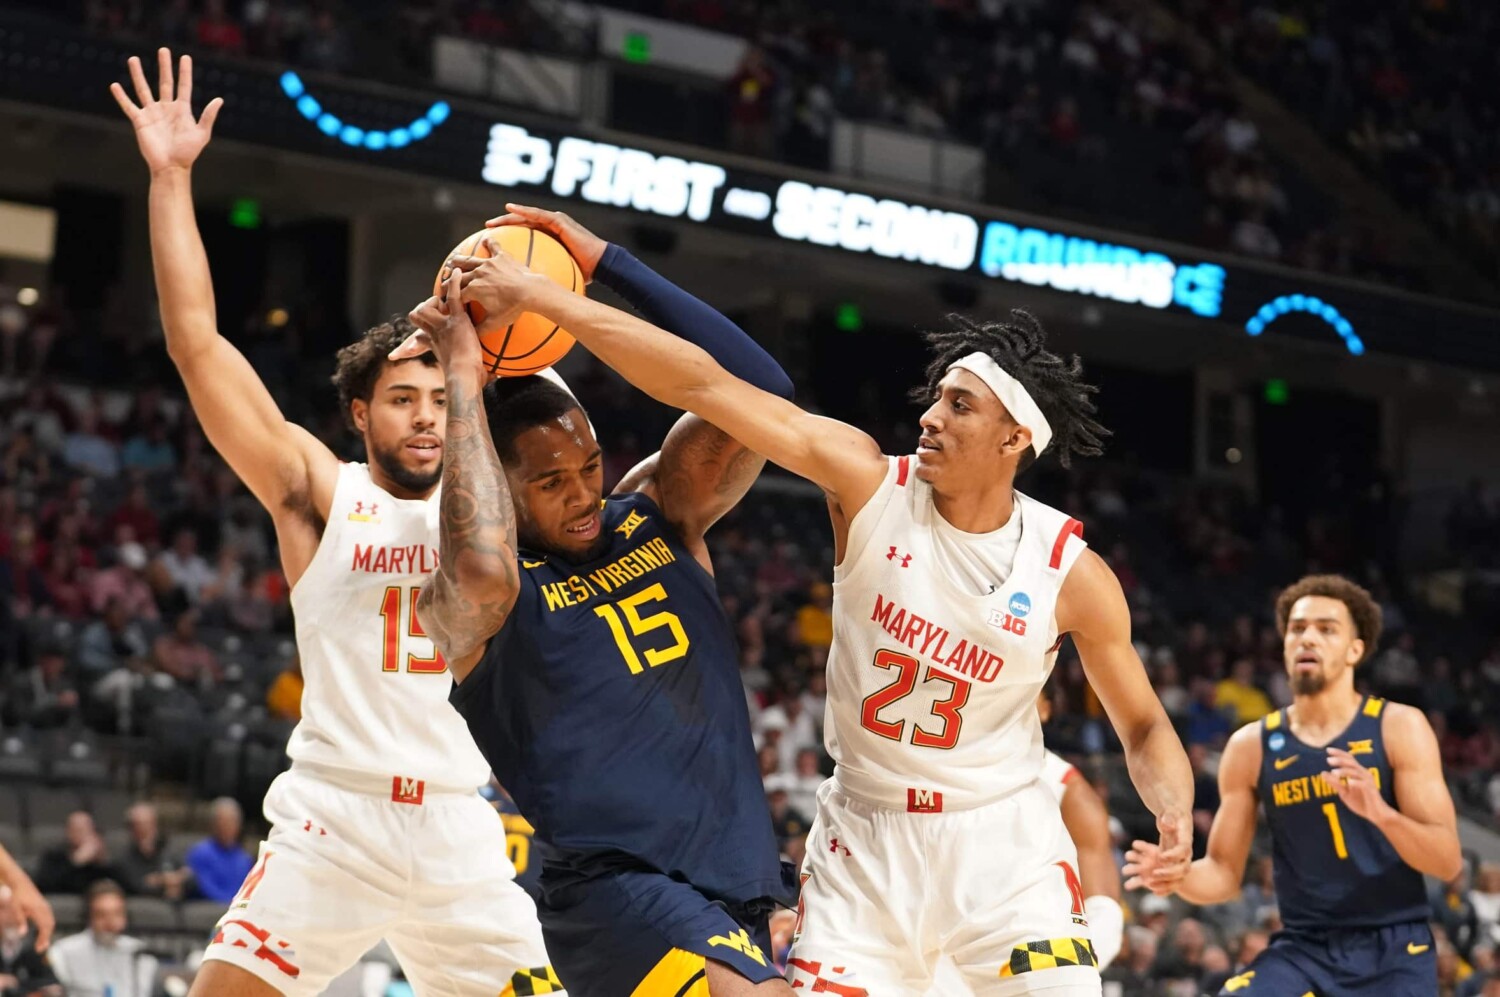 West Virginia Mountaineers forward Jimmy Bell Jr. (15) battles for the ball between Maryland Terrapins guard Ian Martinez (23) and forward Patrick Emilien (15) during the first half in the first round of the 2023 NCAA Tournament at Legacy Arena.